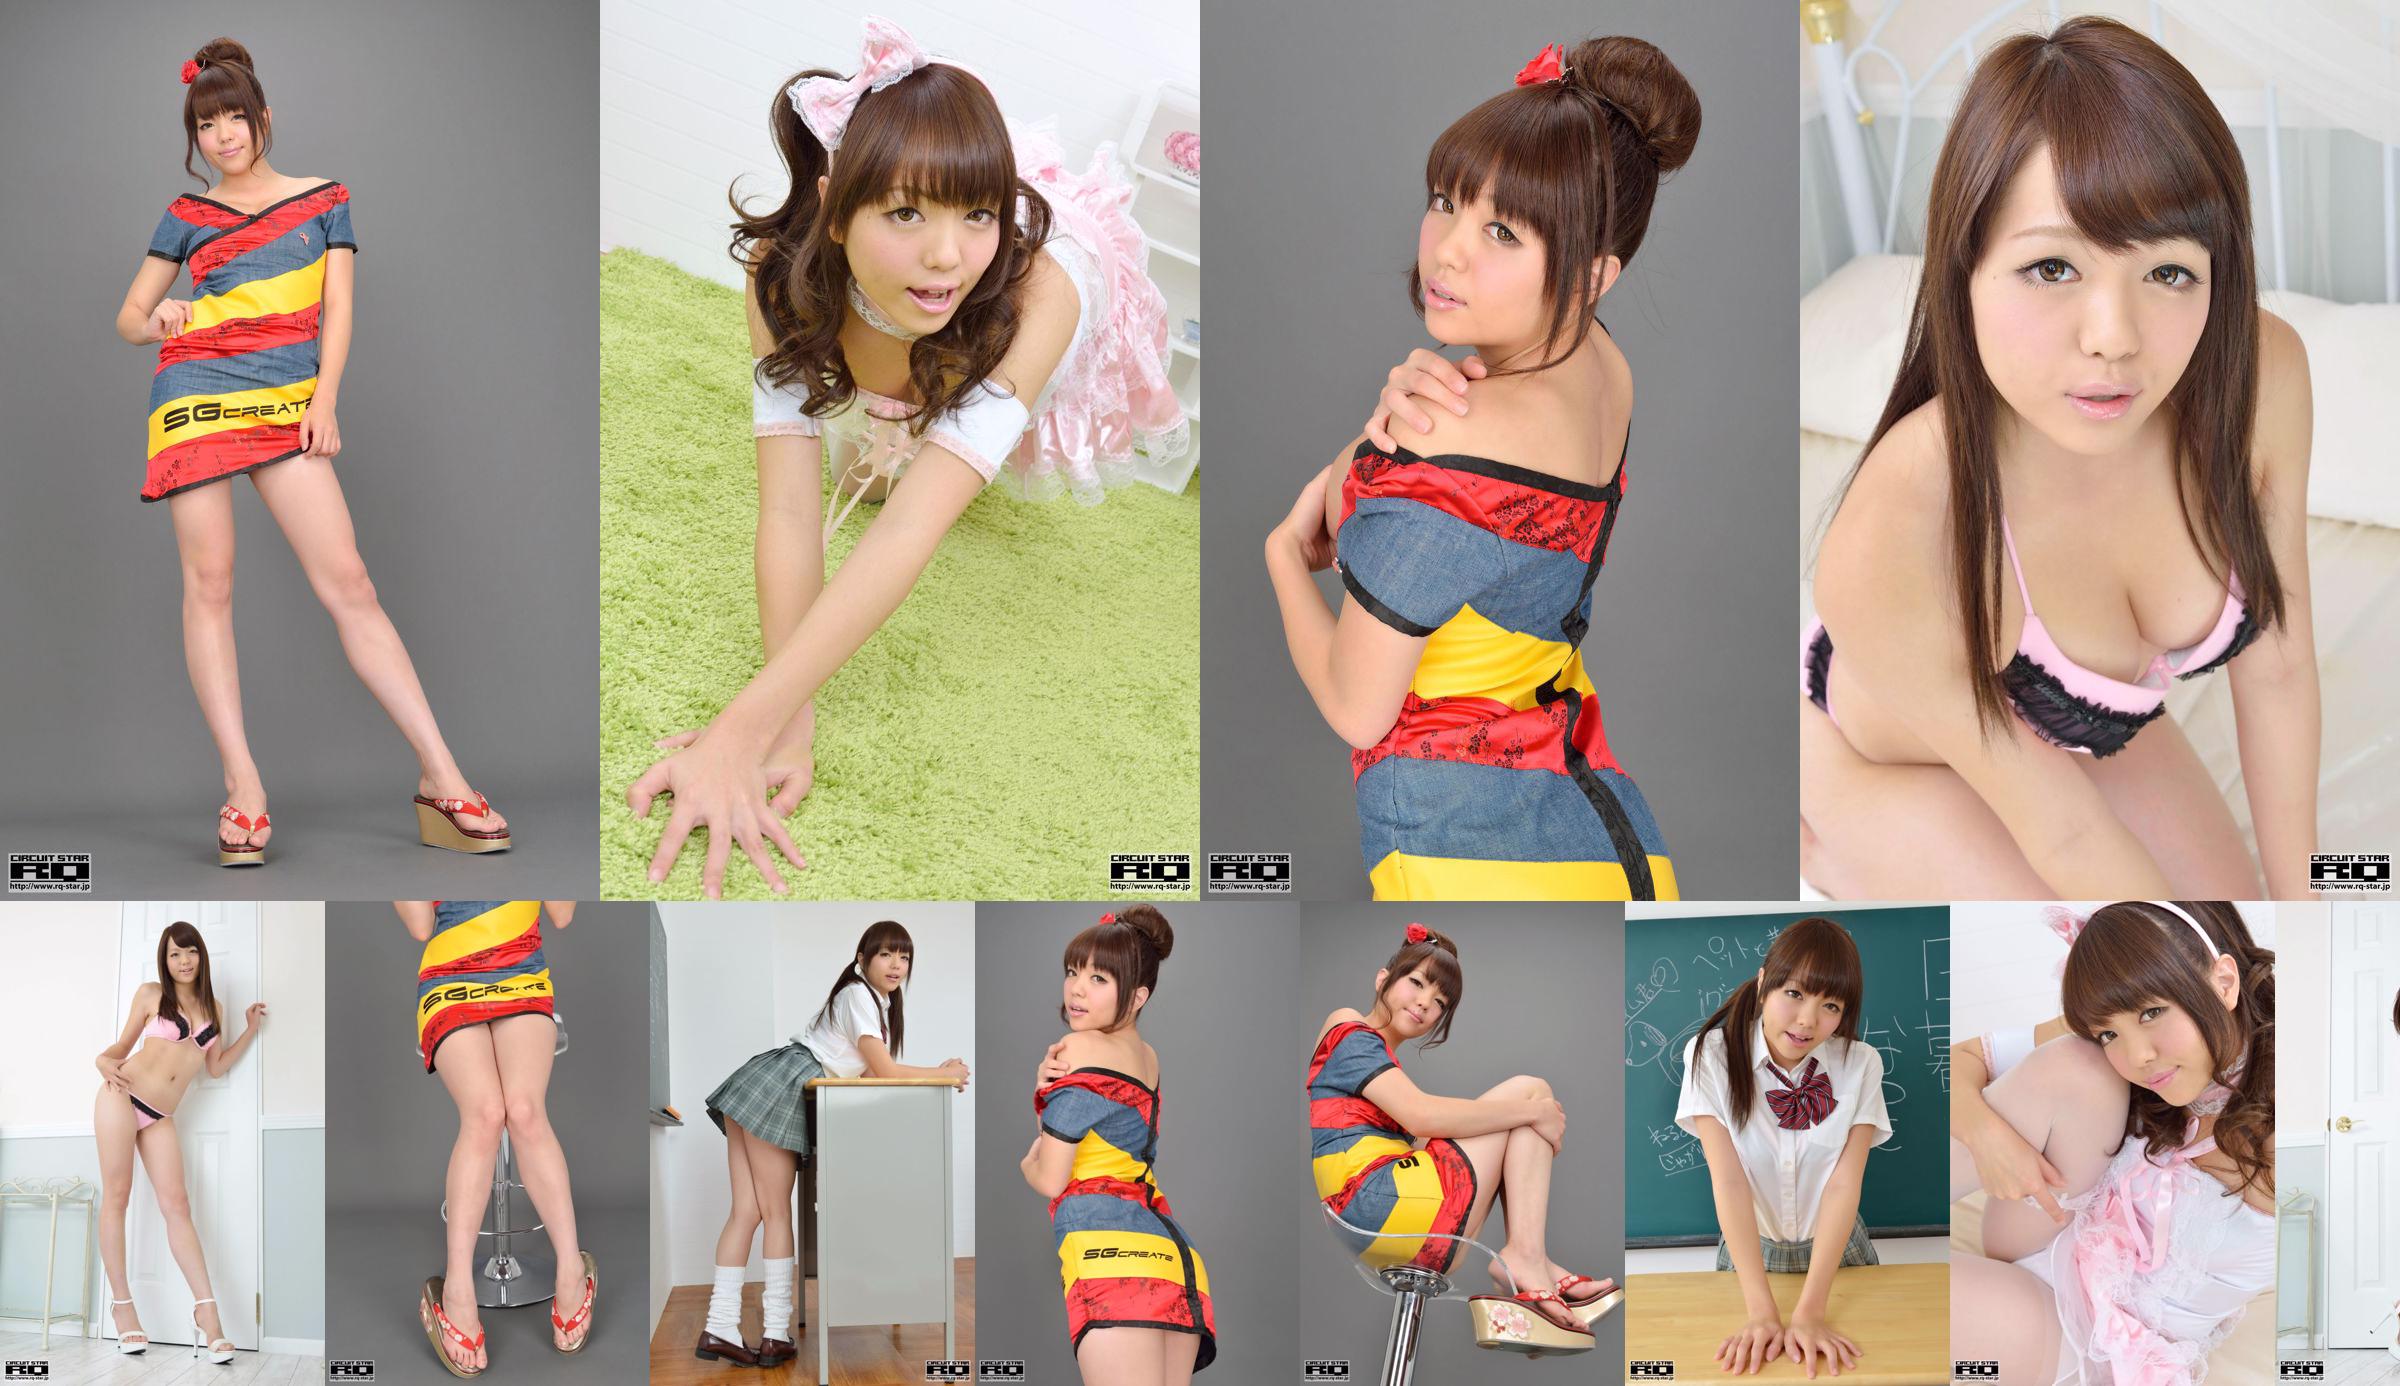 [RQ-STAR] NO 00736 日晚 な つ き Costume Play Lace Beautiful Girl Series No.5563df Page 3